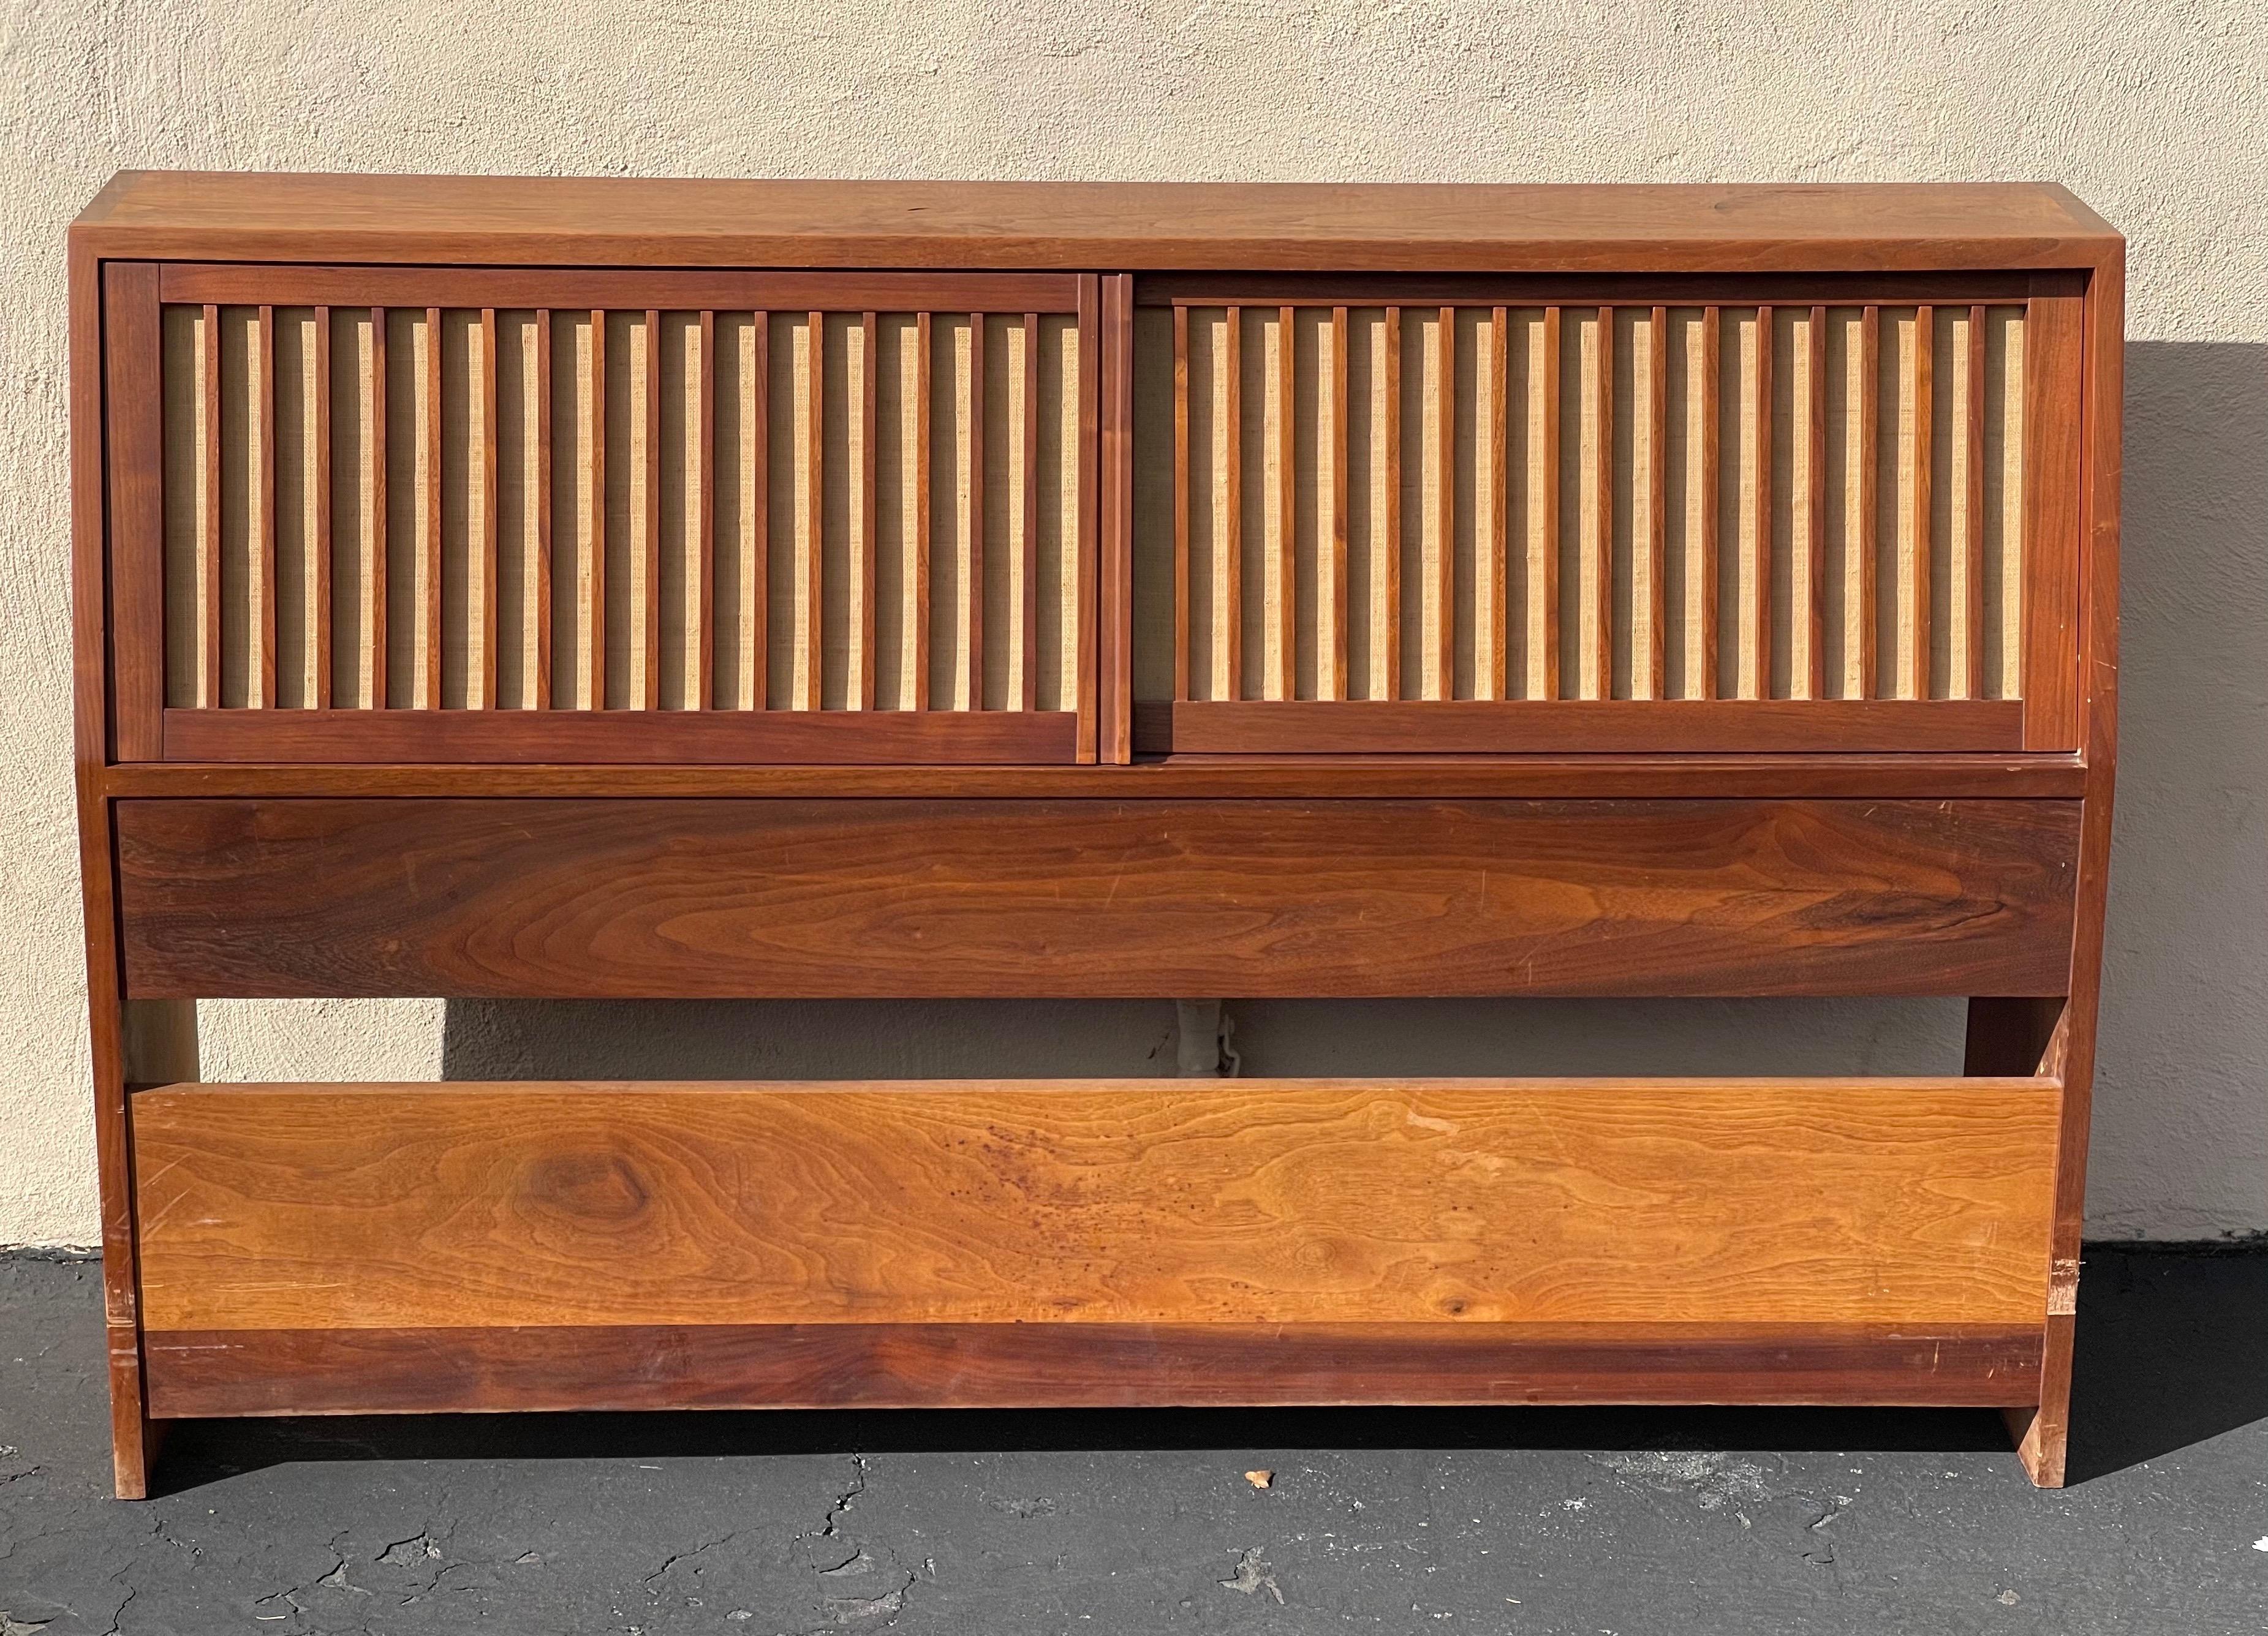 20th Century Striking Handcrafted Storage Headboard by George Nakashima with Paperwork, 1959 For Sale